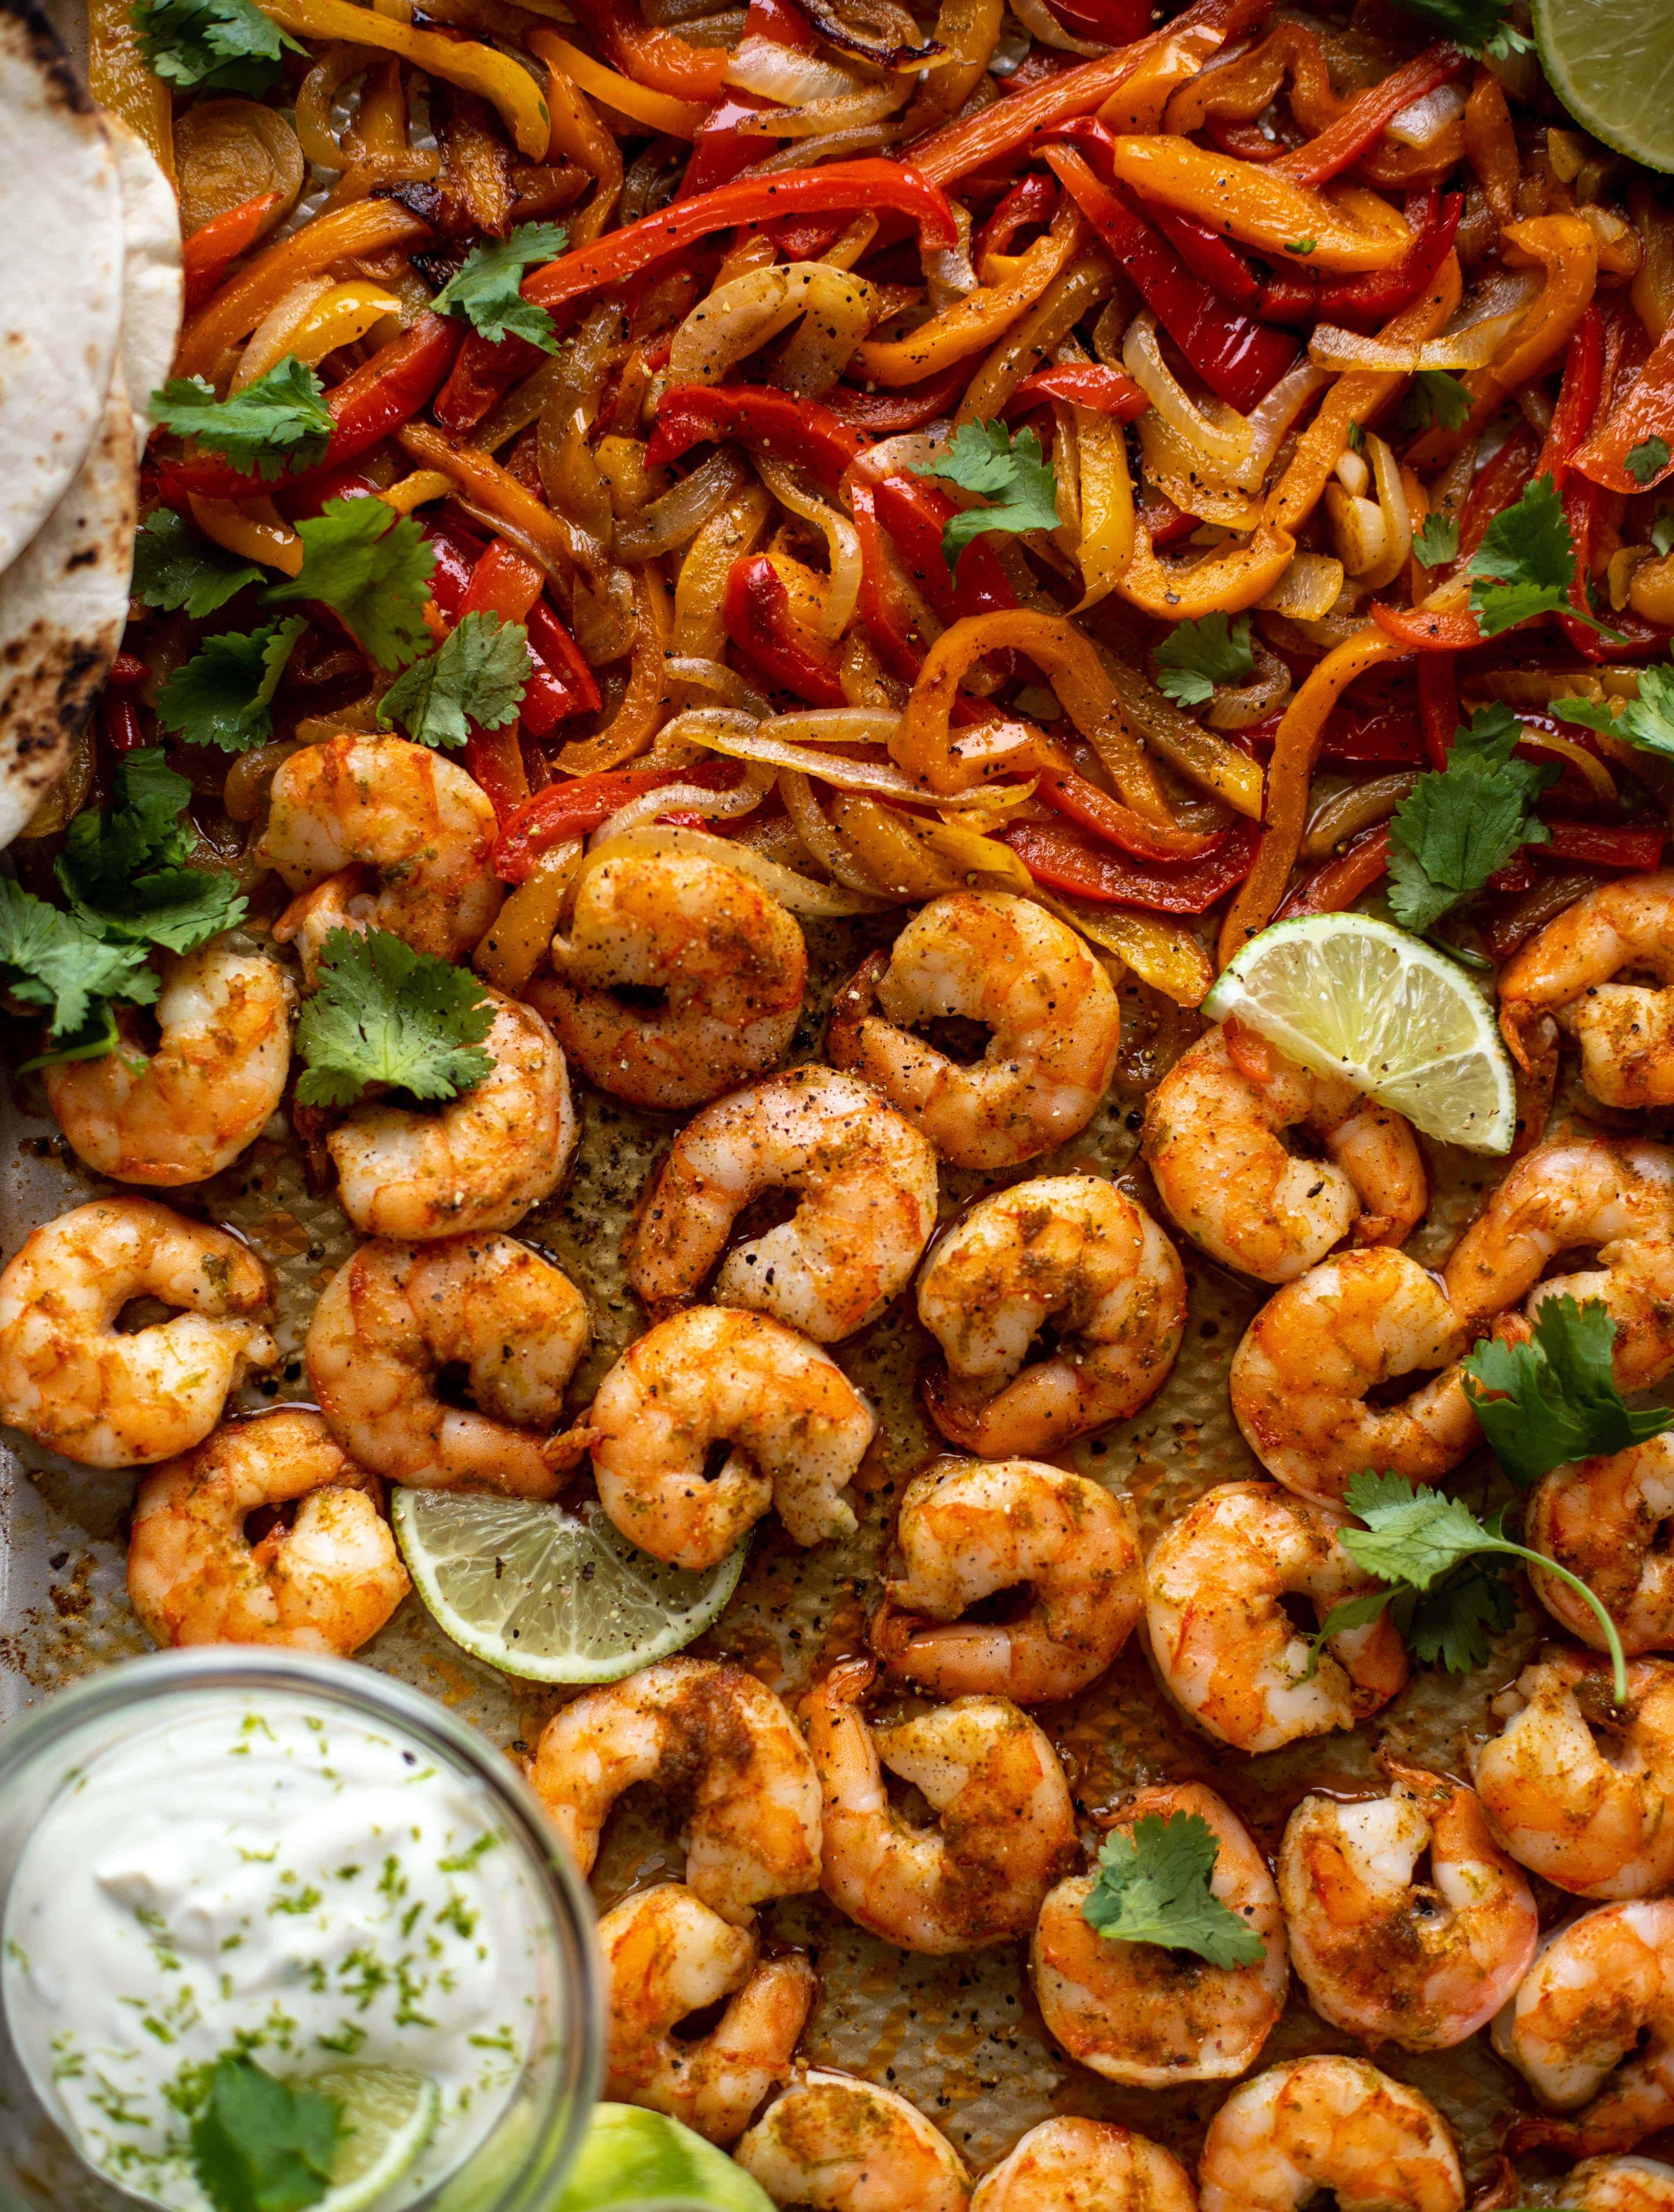 These lime sheet pan shrimp fajitas are the best weeknight meal! Make everything on the sheet pan and serve in warm tortillas. Delicious!